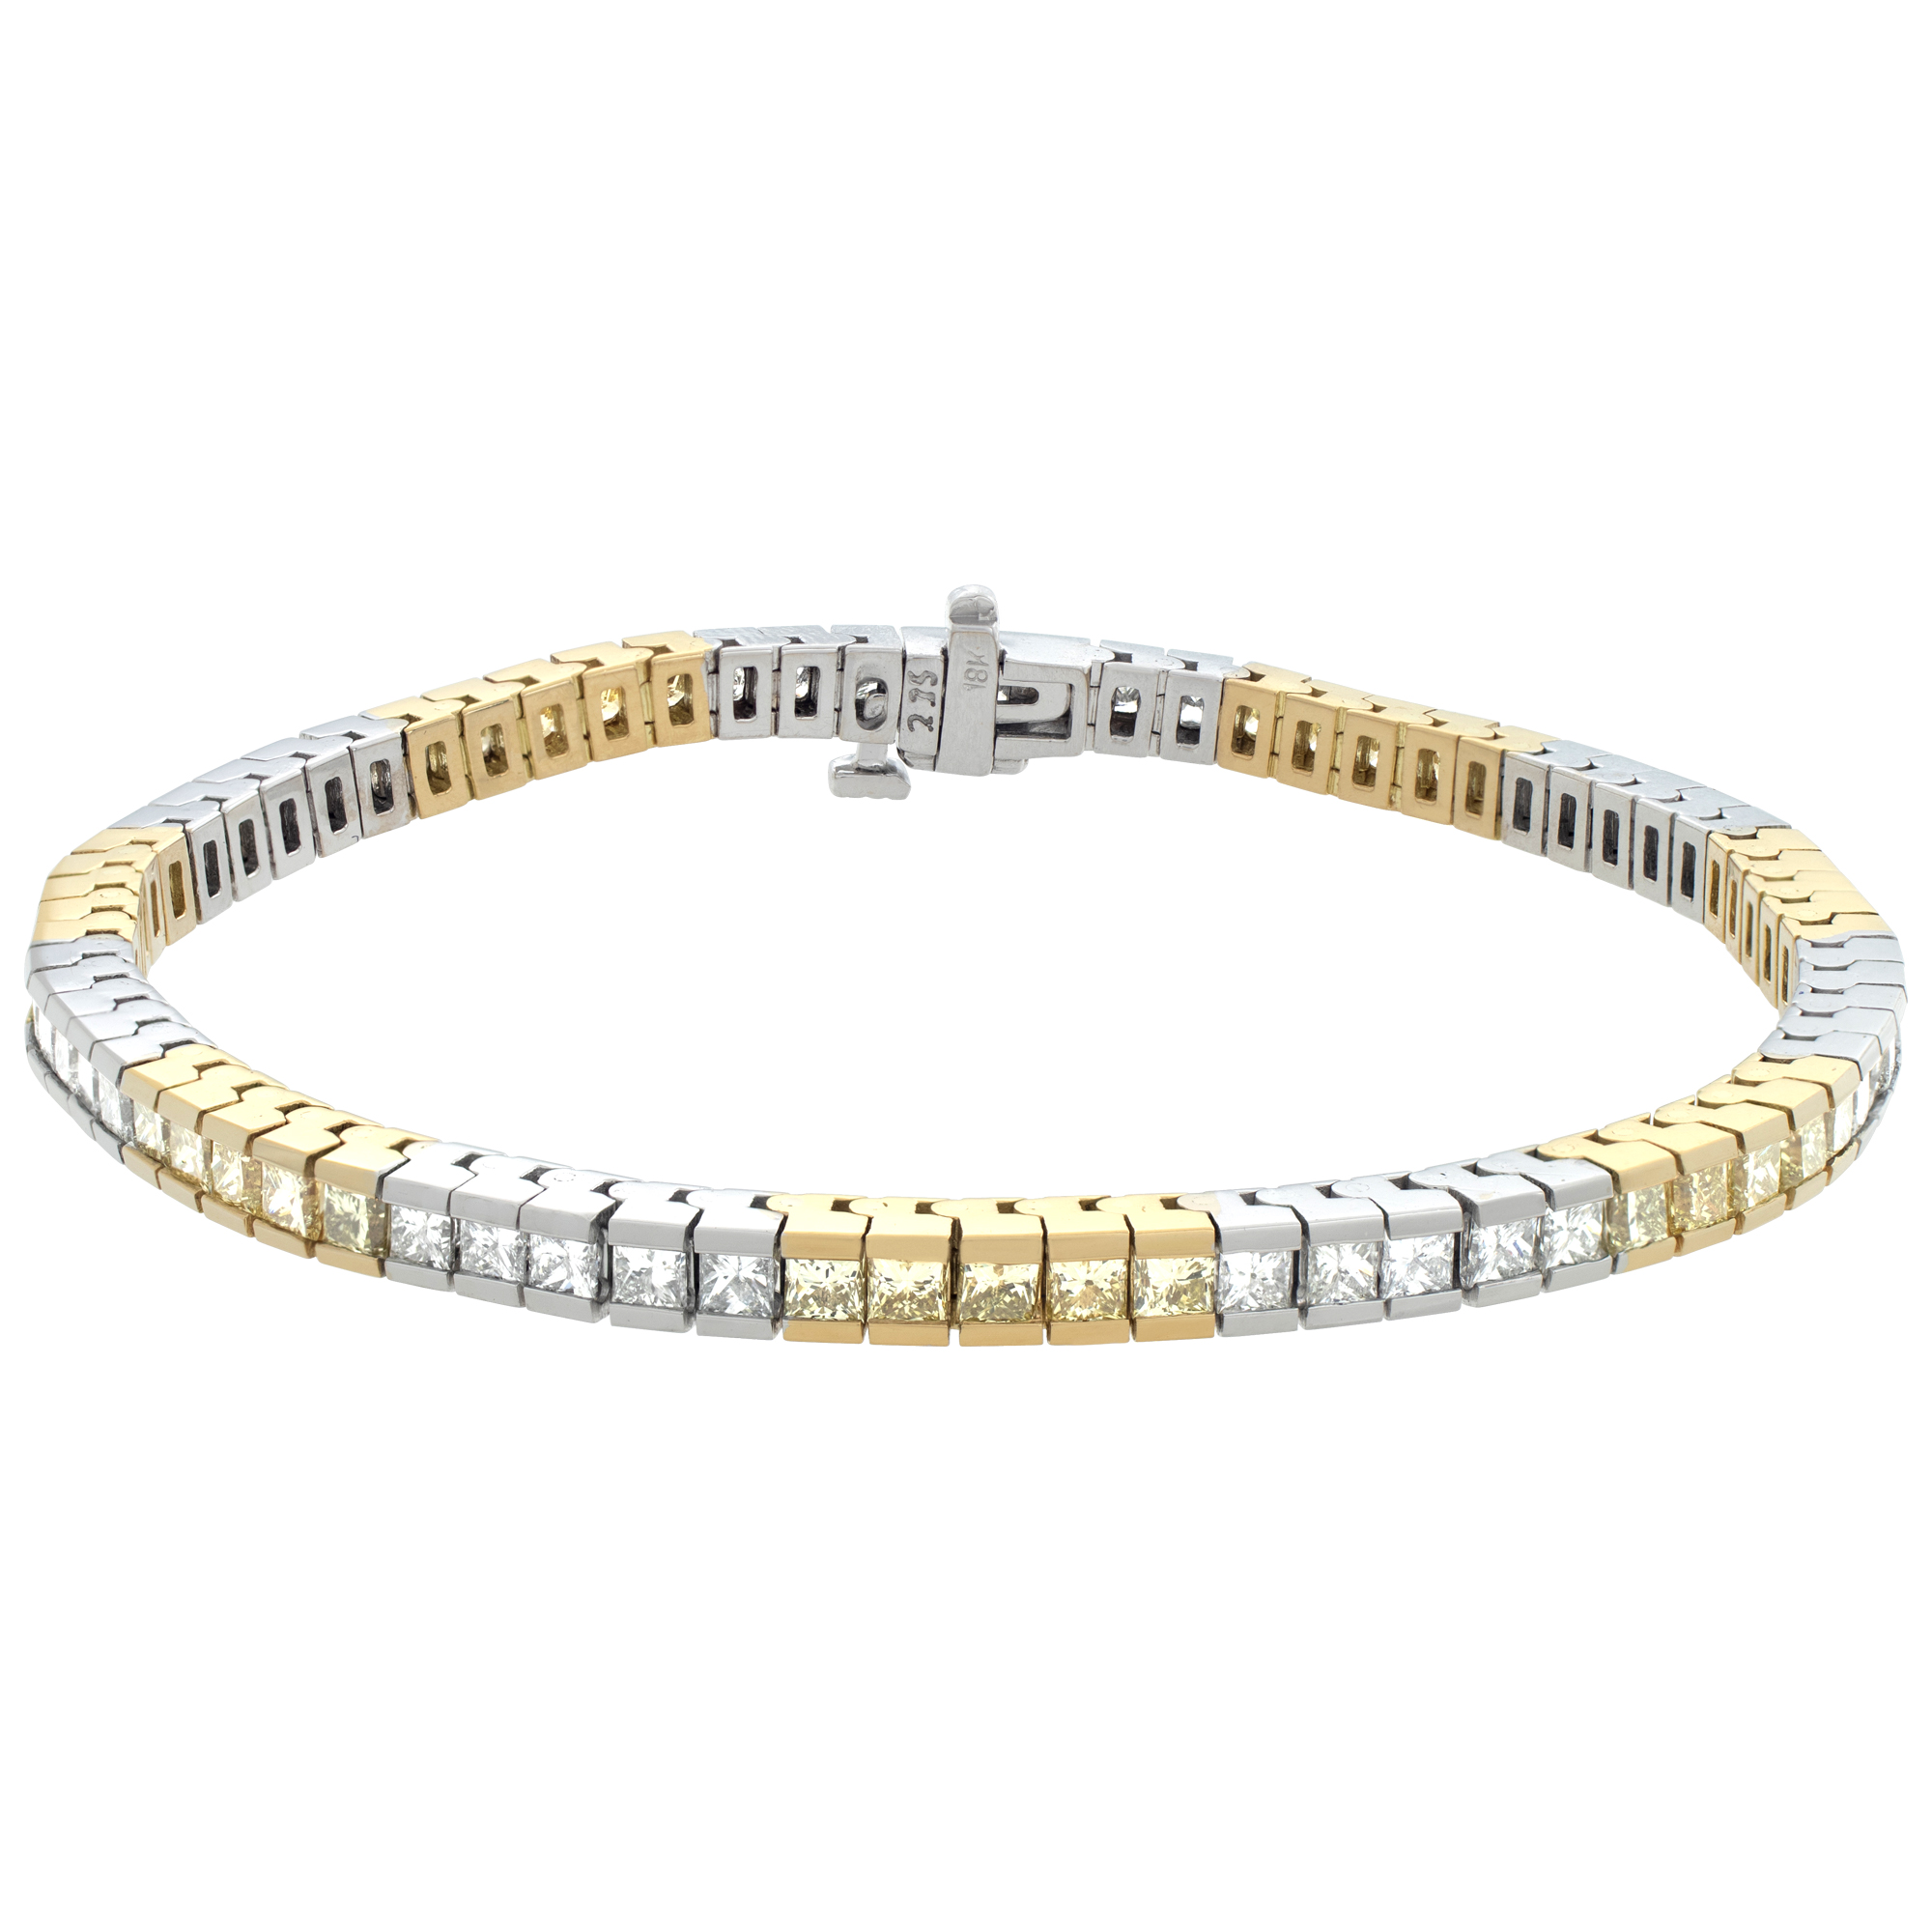 18k white and yellow gold bracelet with white and yellow diamonds. image 1